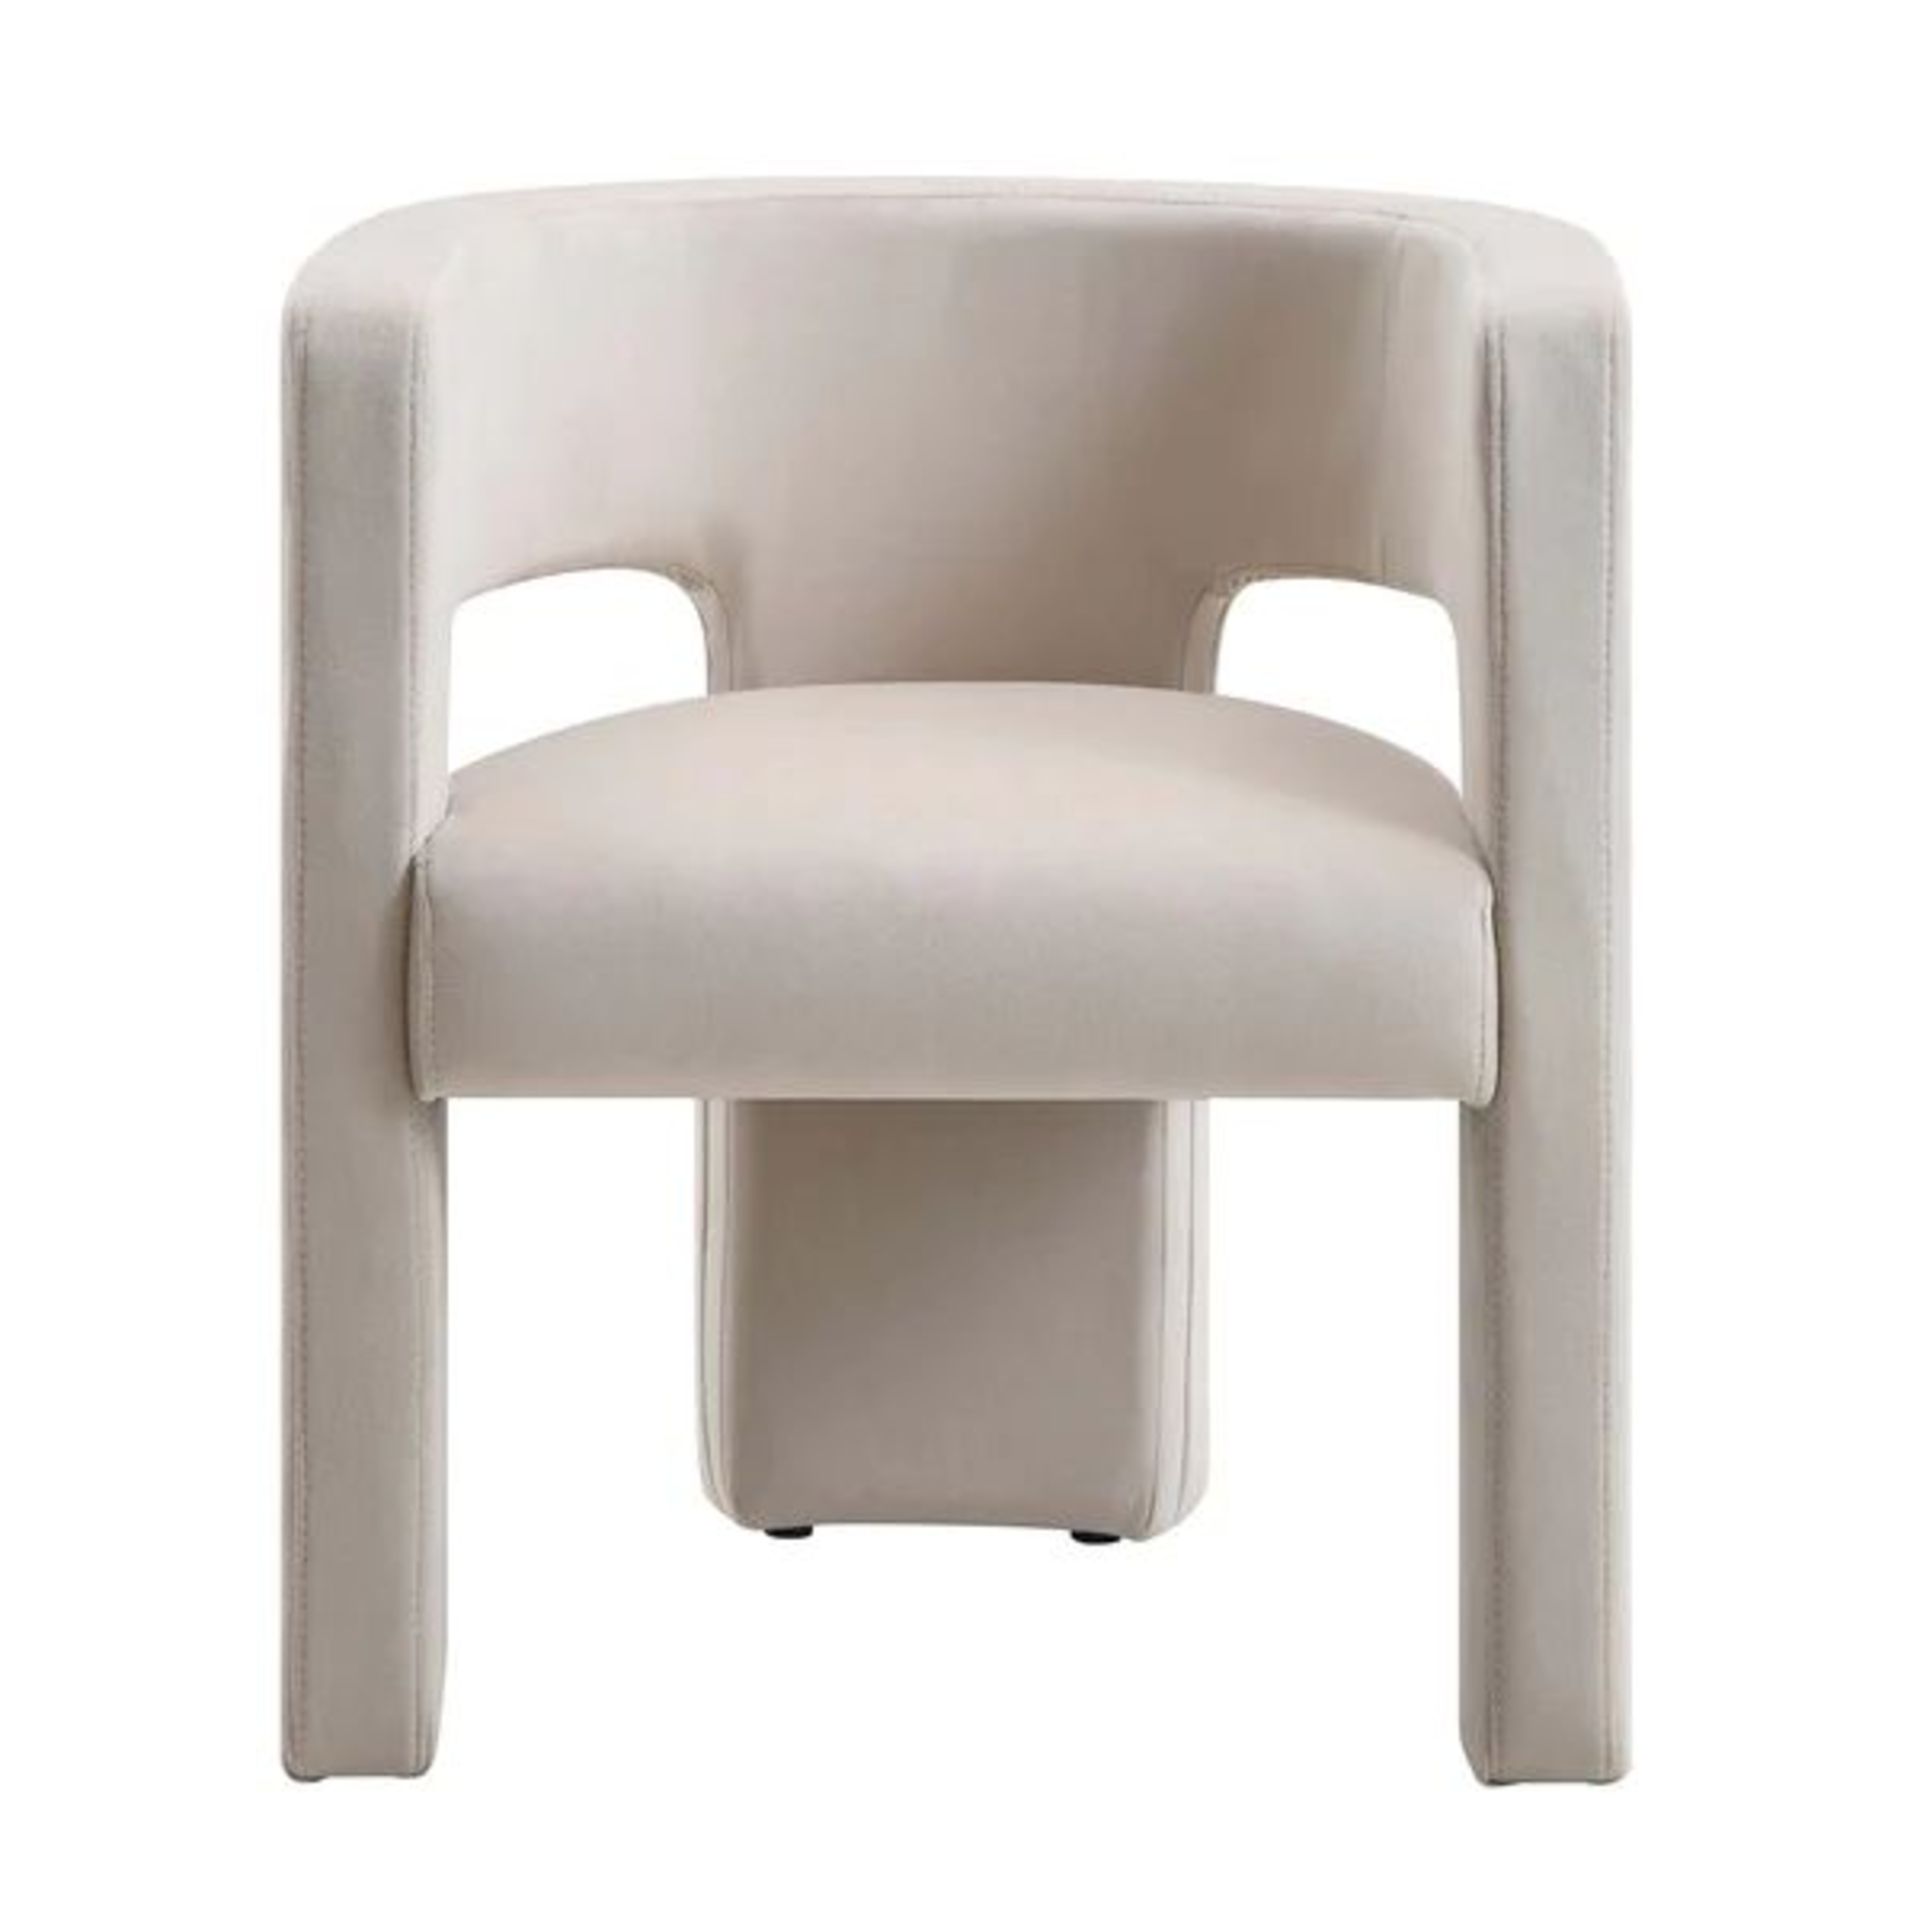 Greenwich Champagne Velvet Dining Chair. - ER29. RRP £229.99. Our beautiful Greenwich chair features